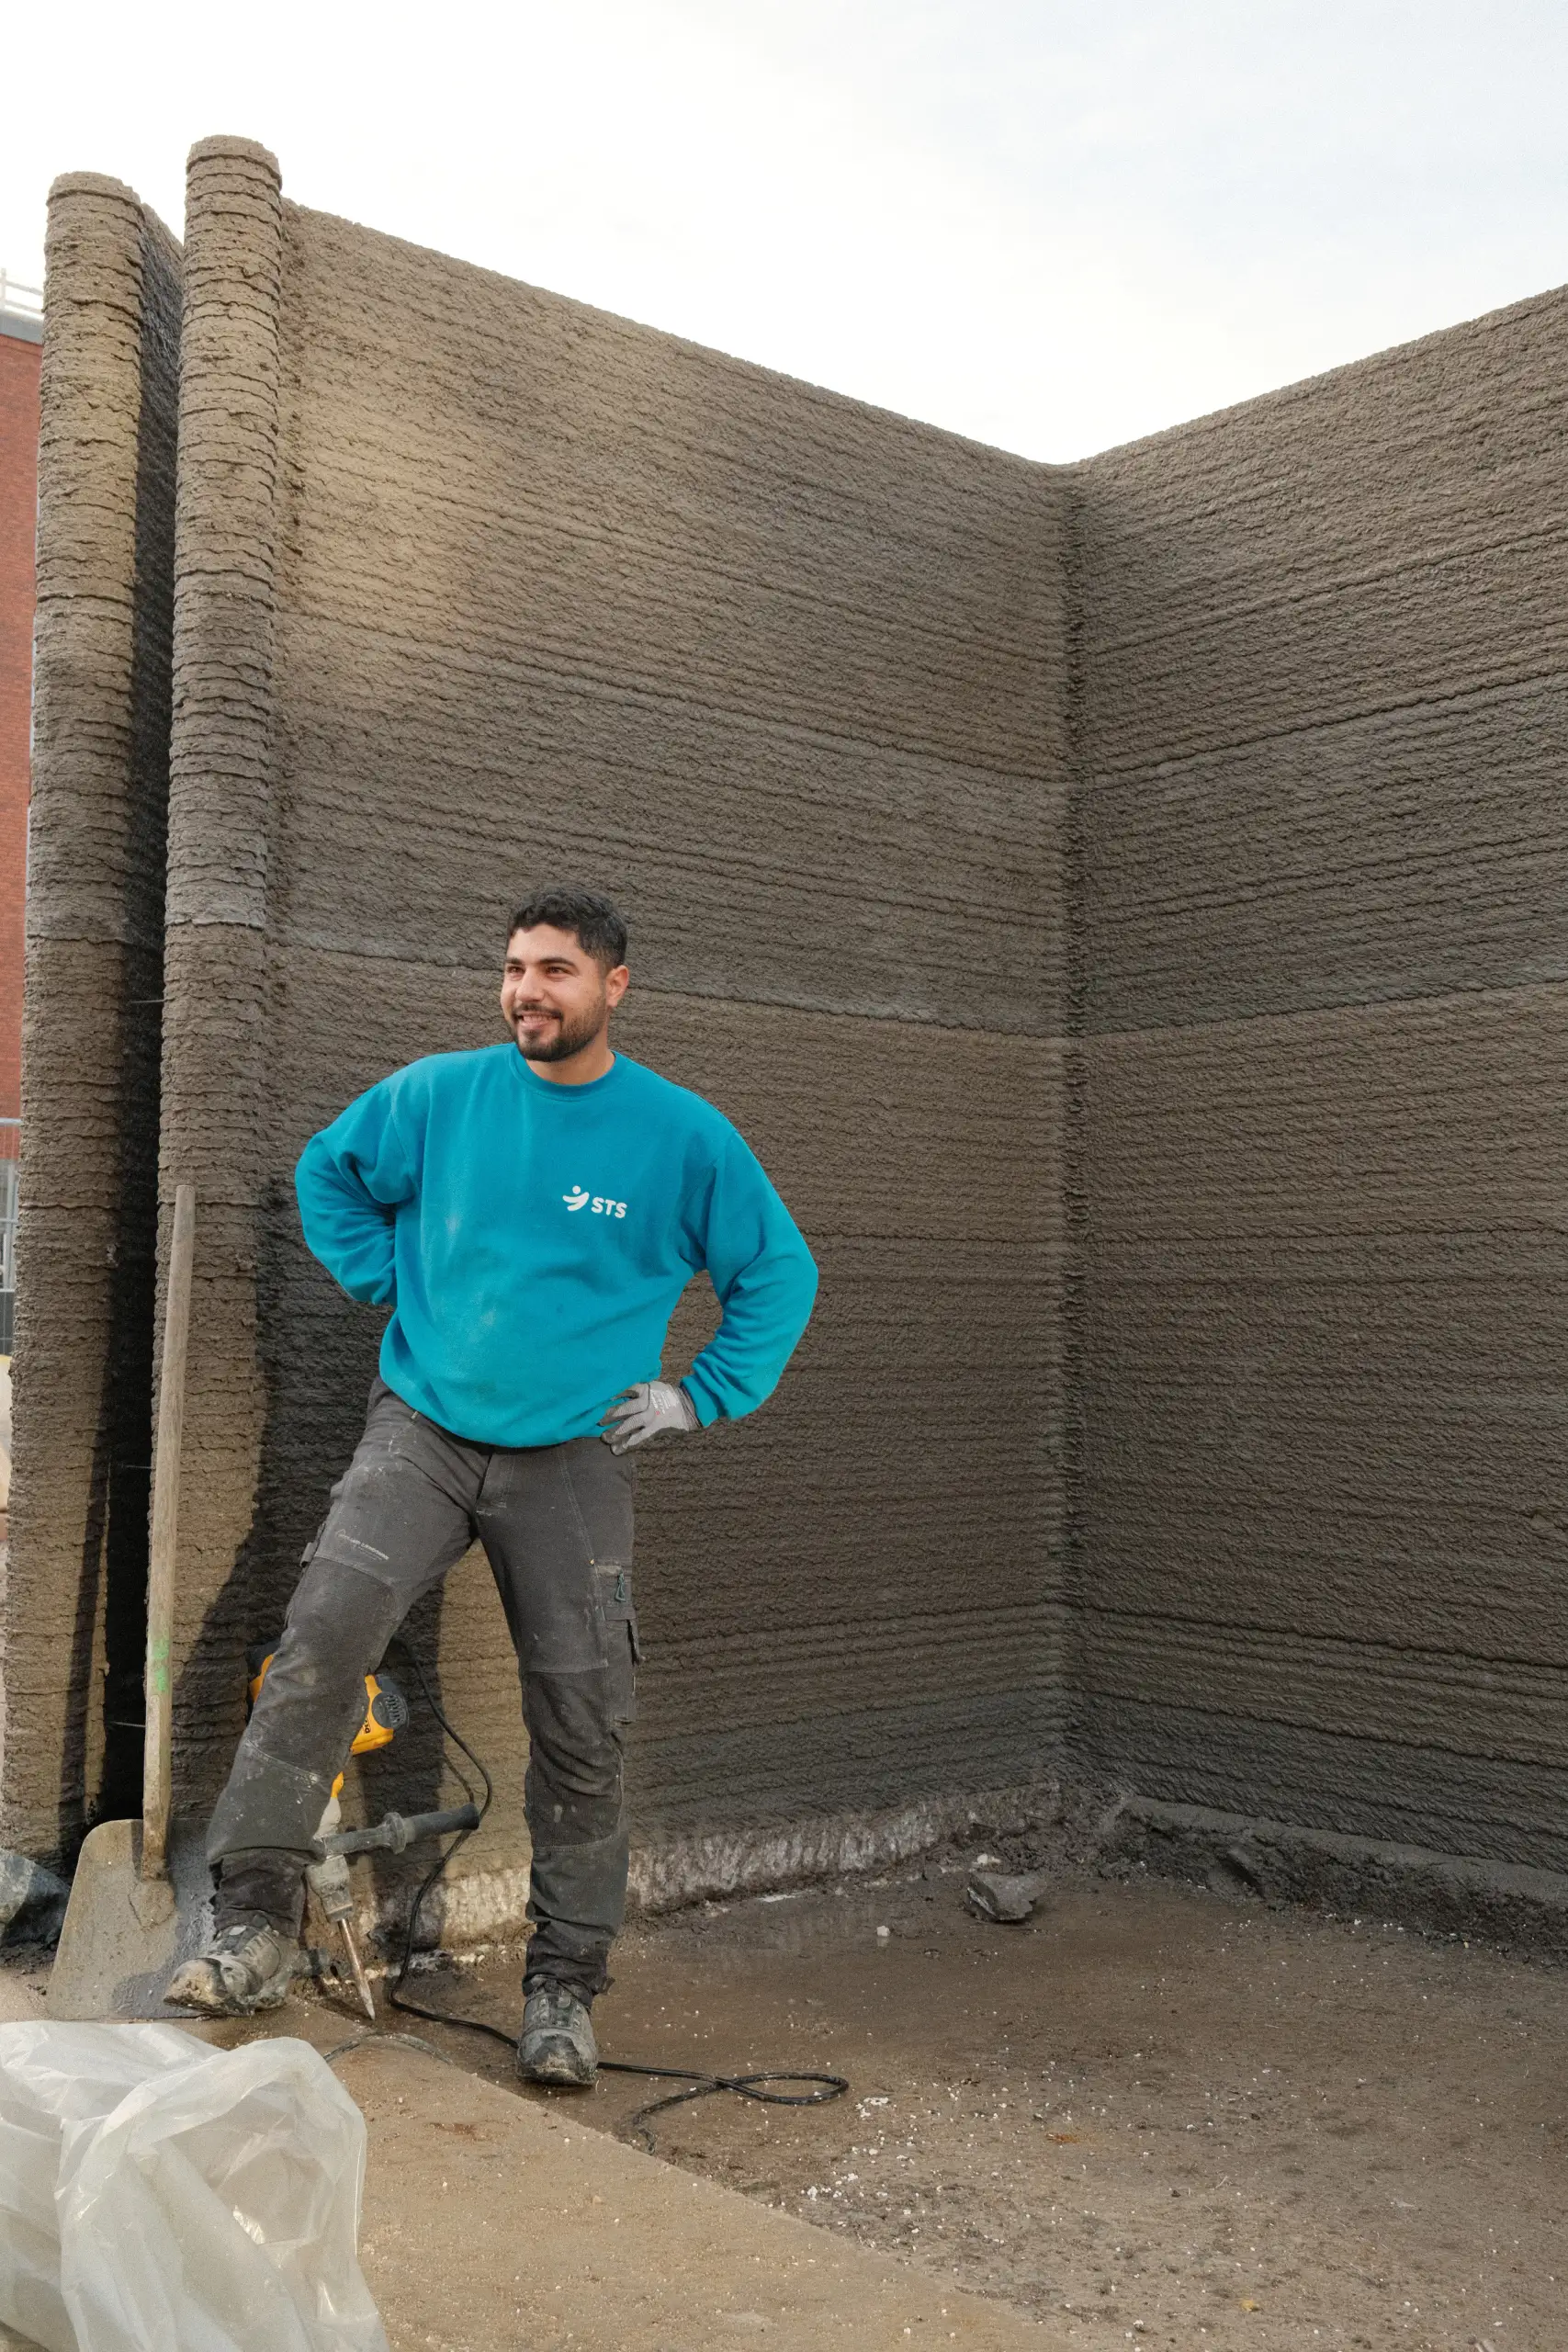 Image of 3D-printed concrete layers, with man in foreground